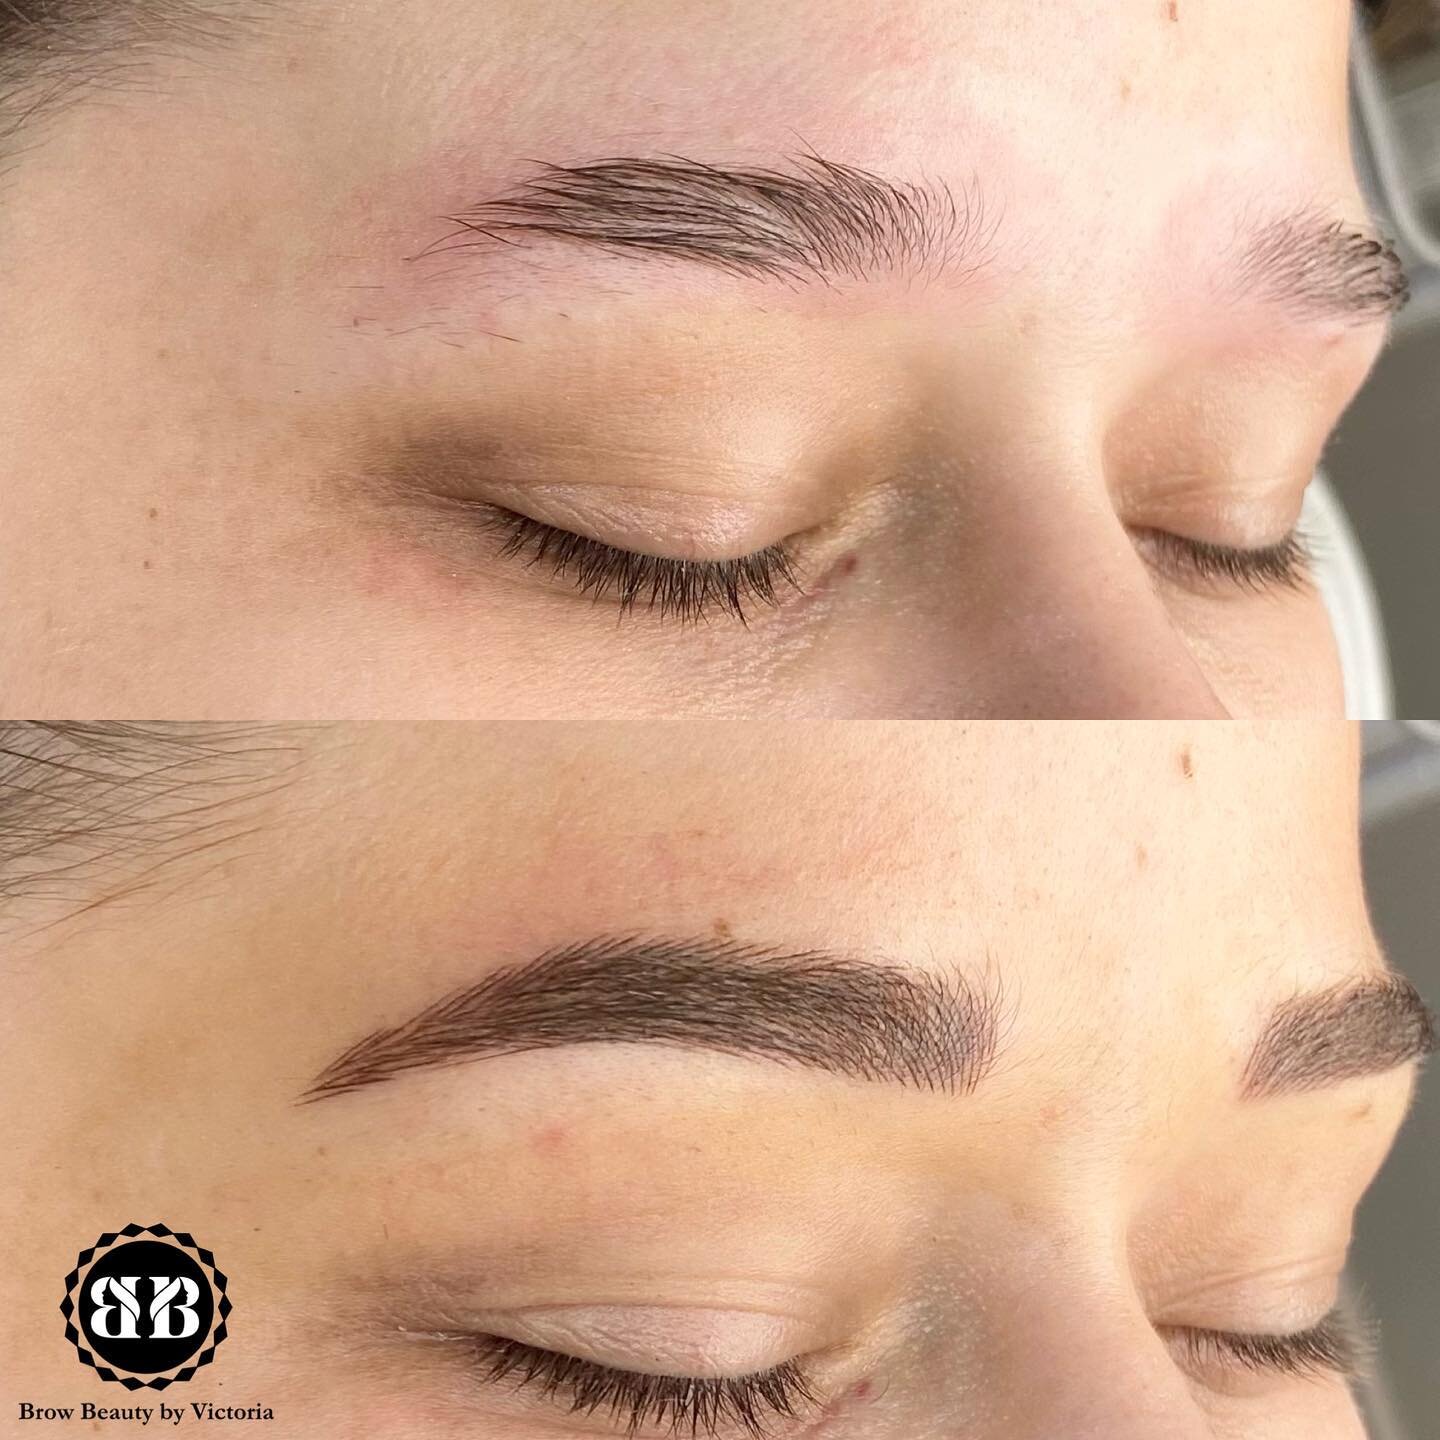 #1 rule of permanent makeup: always account for the client&rsquo;s eyebrow goals. 

I&rsquo;ve had many clients recently who want their tails lifted from where they naturally grow. I&rsquo;m here to tell you- this is absolutely possible to achieve! 
